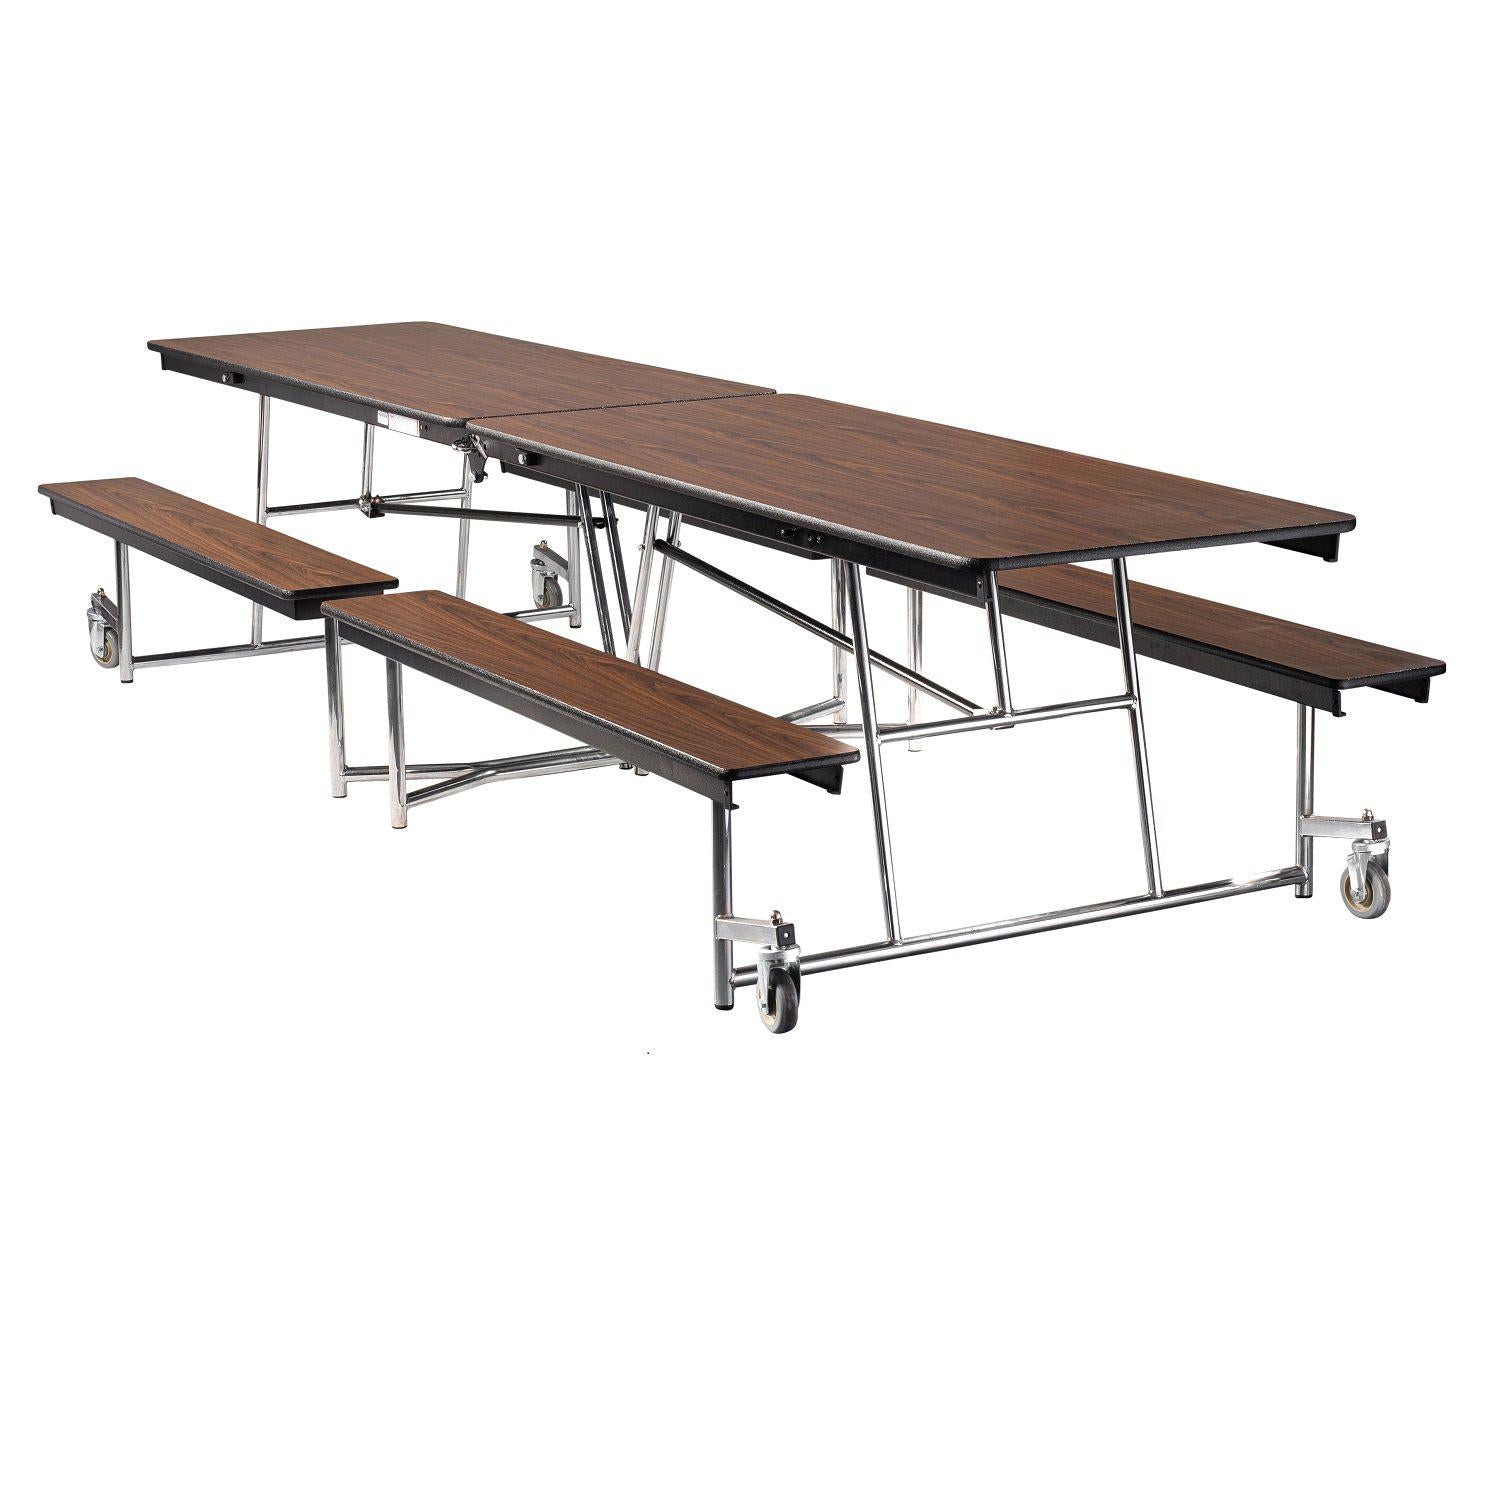 Mobile Cafeteria Table with Benches, 12'L, Plywood Core, Vinyl T-Mold Edge, Chrome Frame